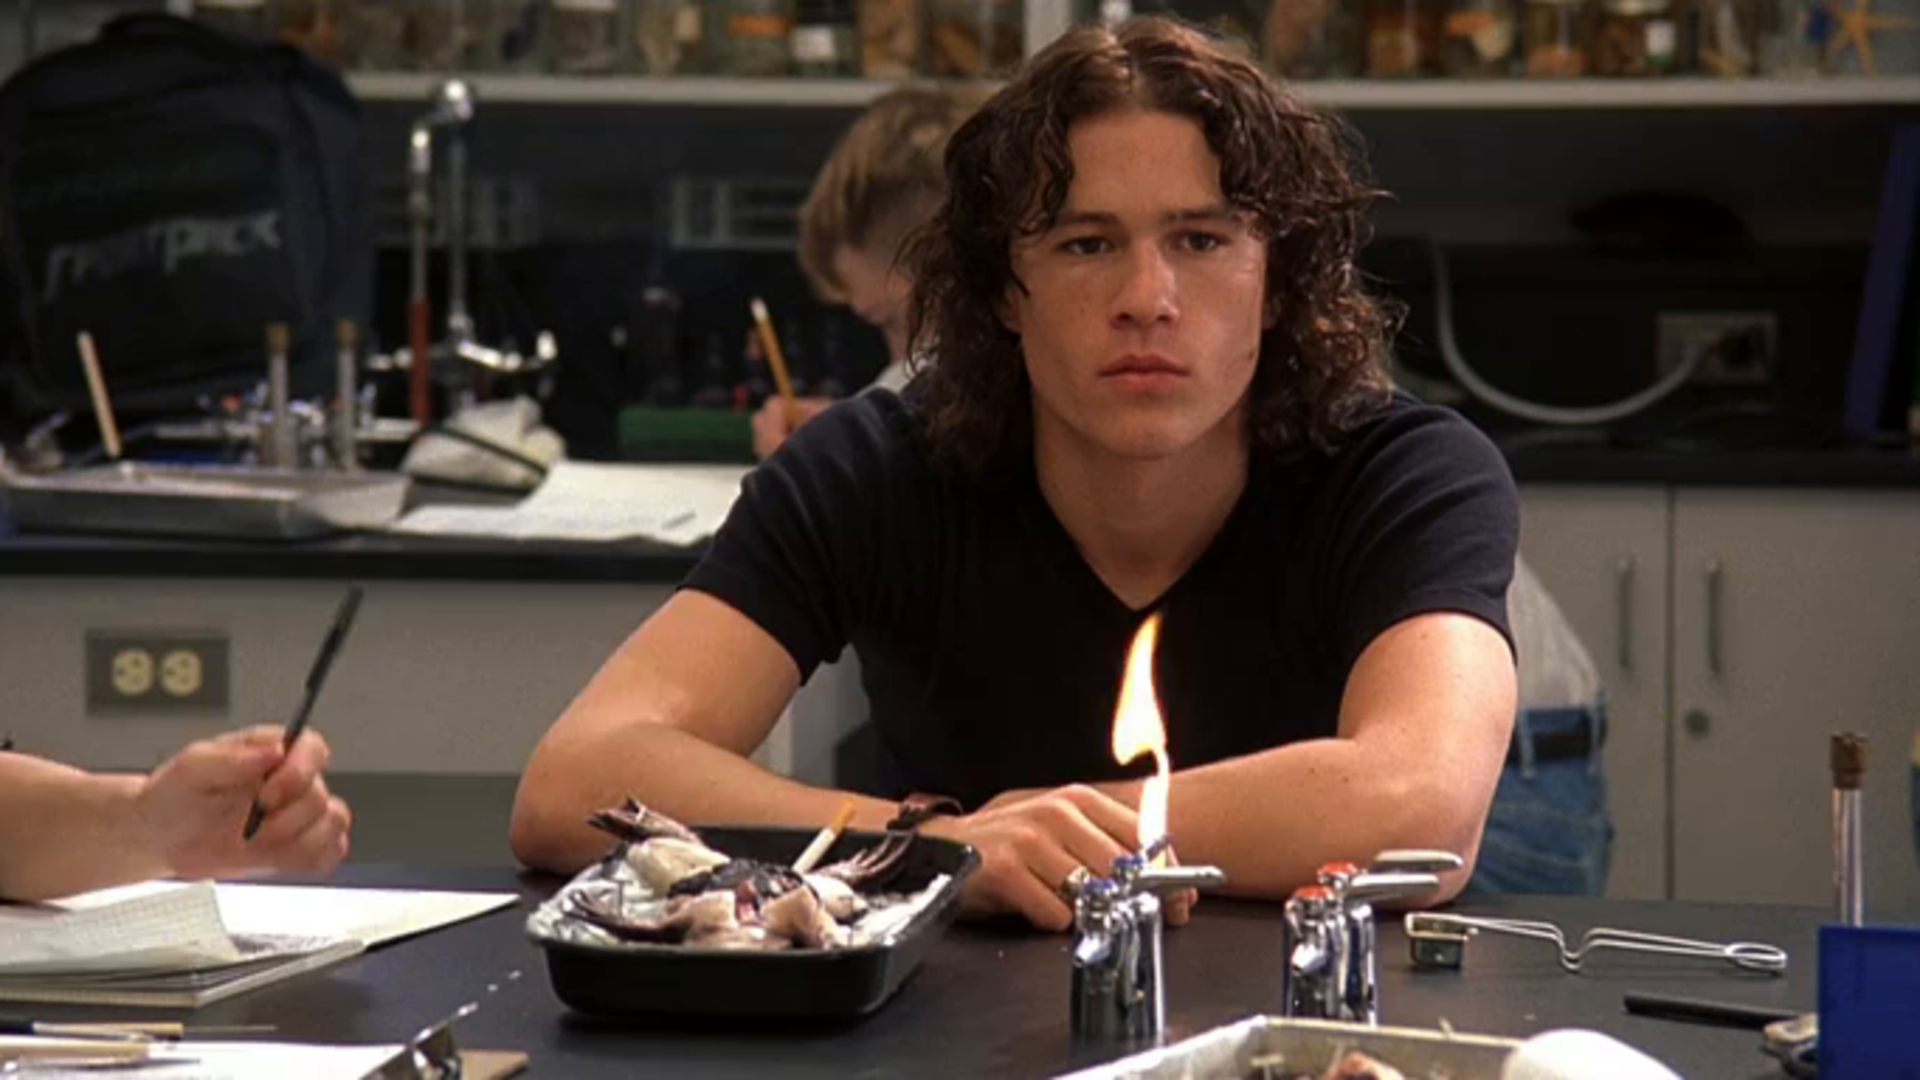 Ledger improvises a scene in 10 Things I Hate About You